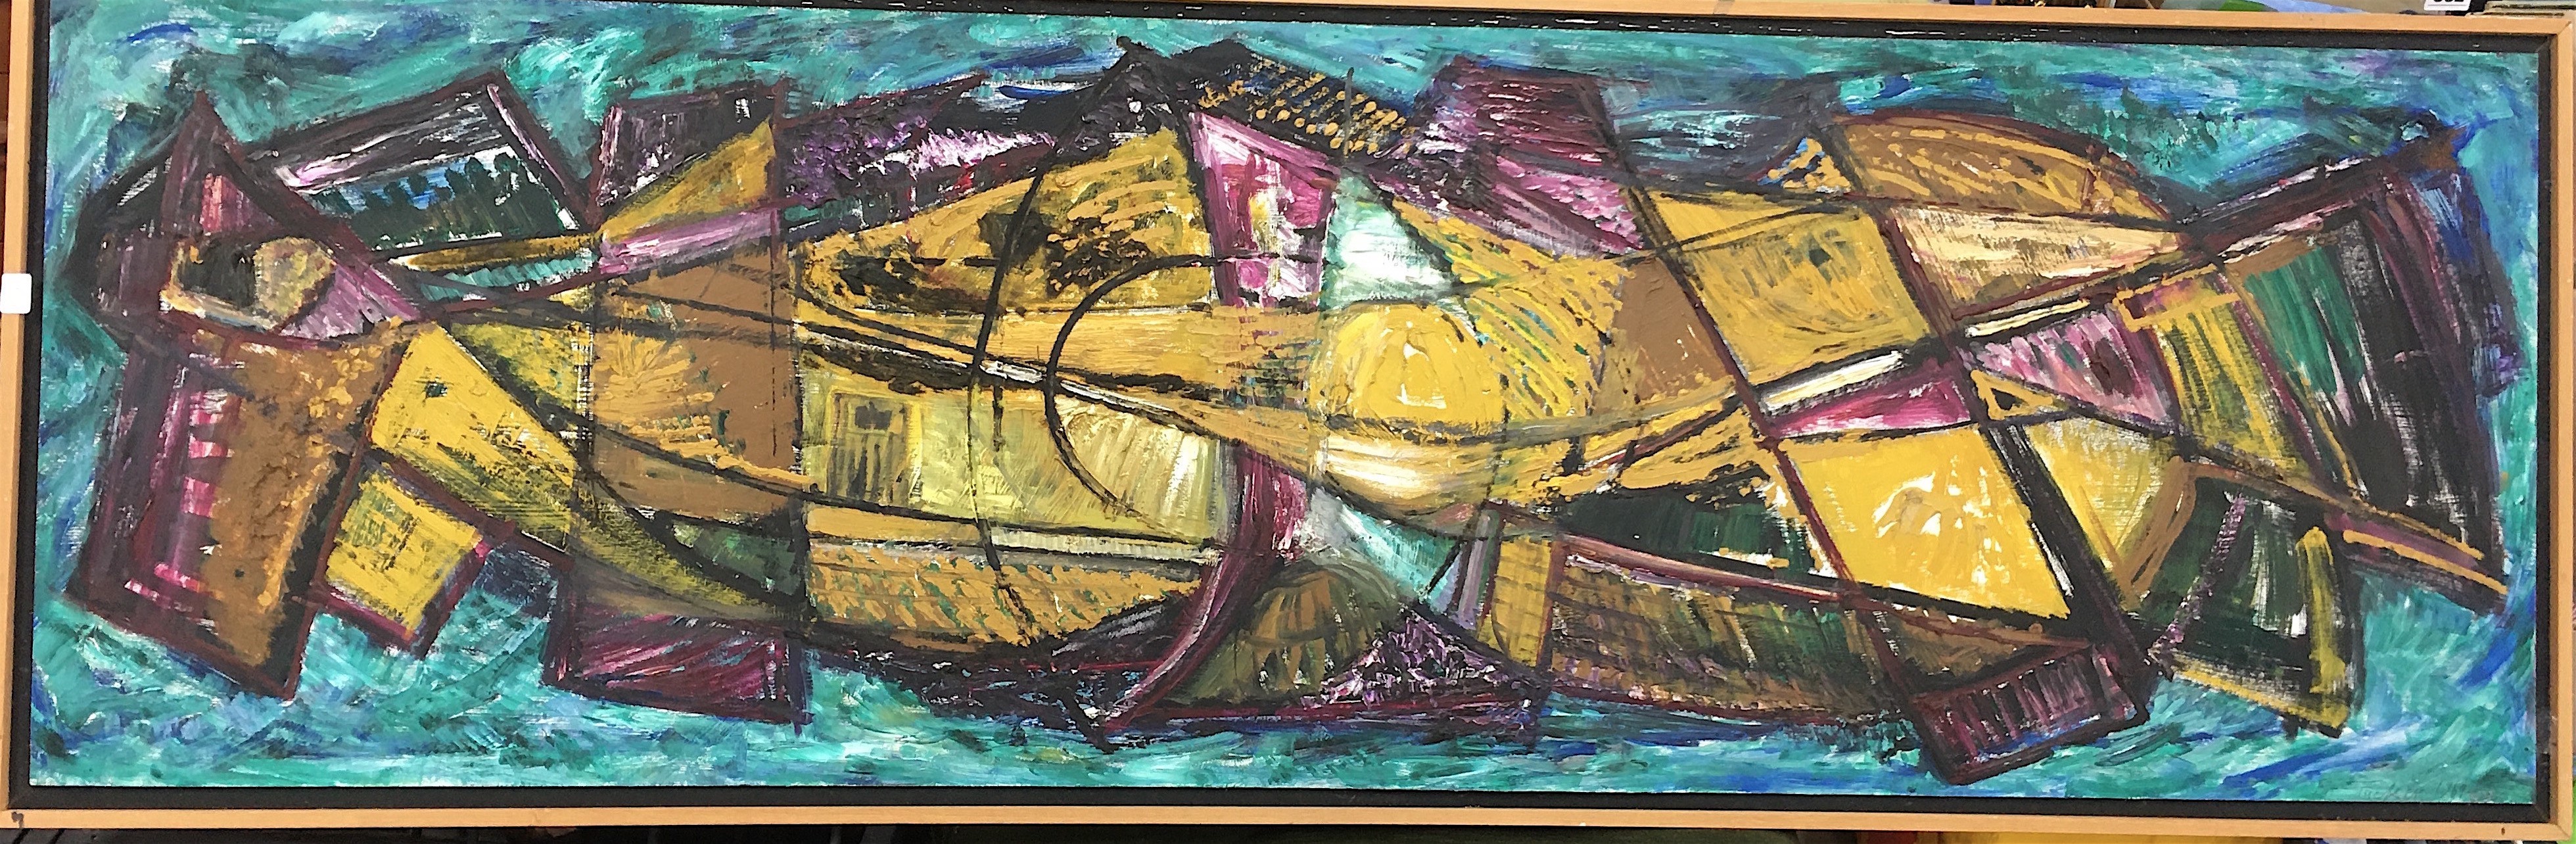 Pat Tucker, oil on board, Untitled, signed and dated 1969, 46 x 148cm